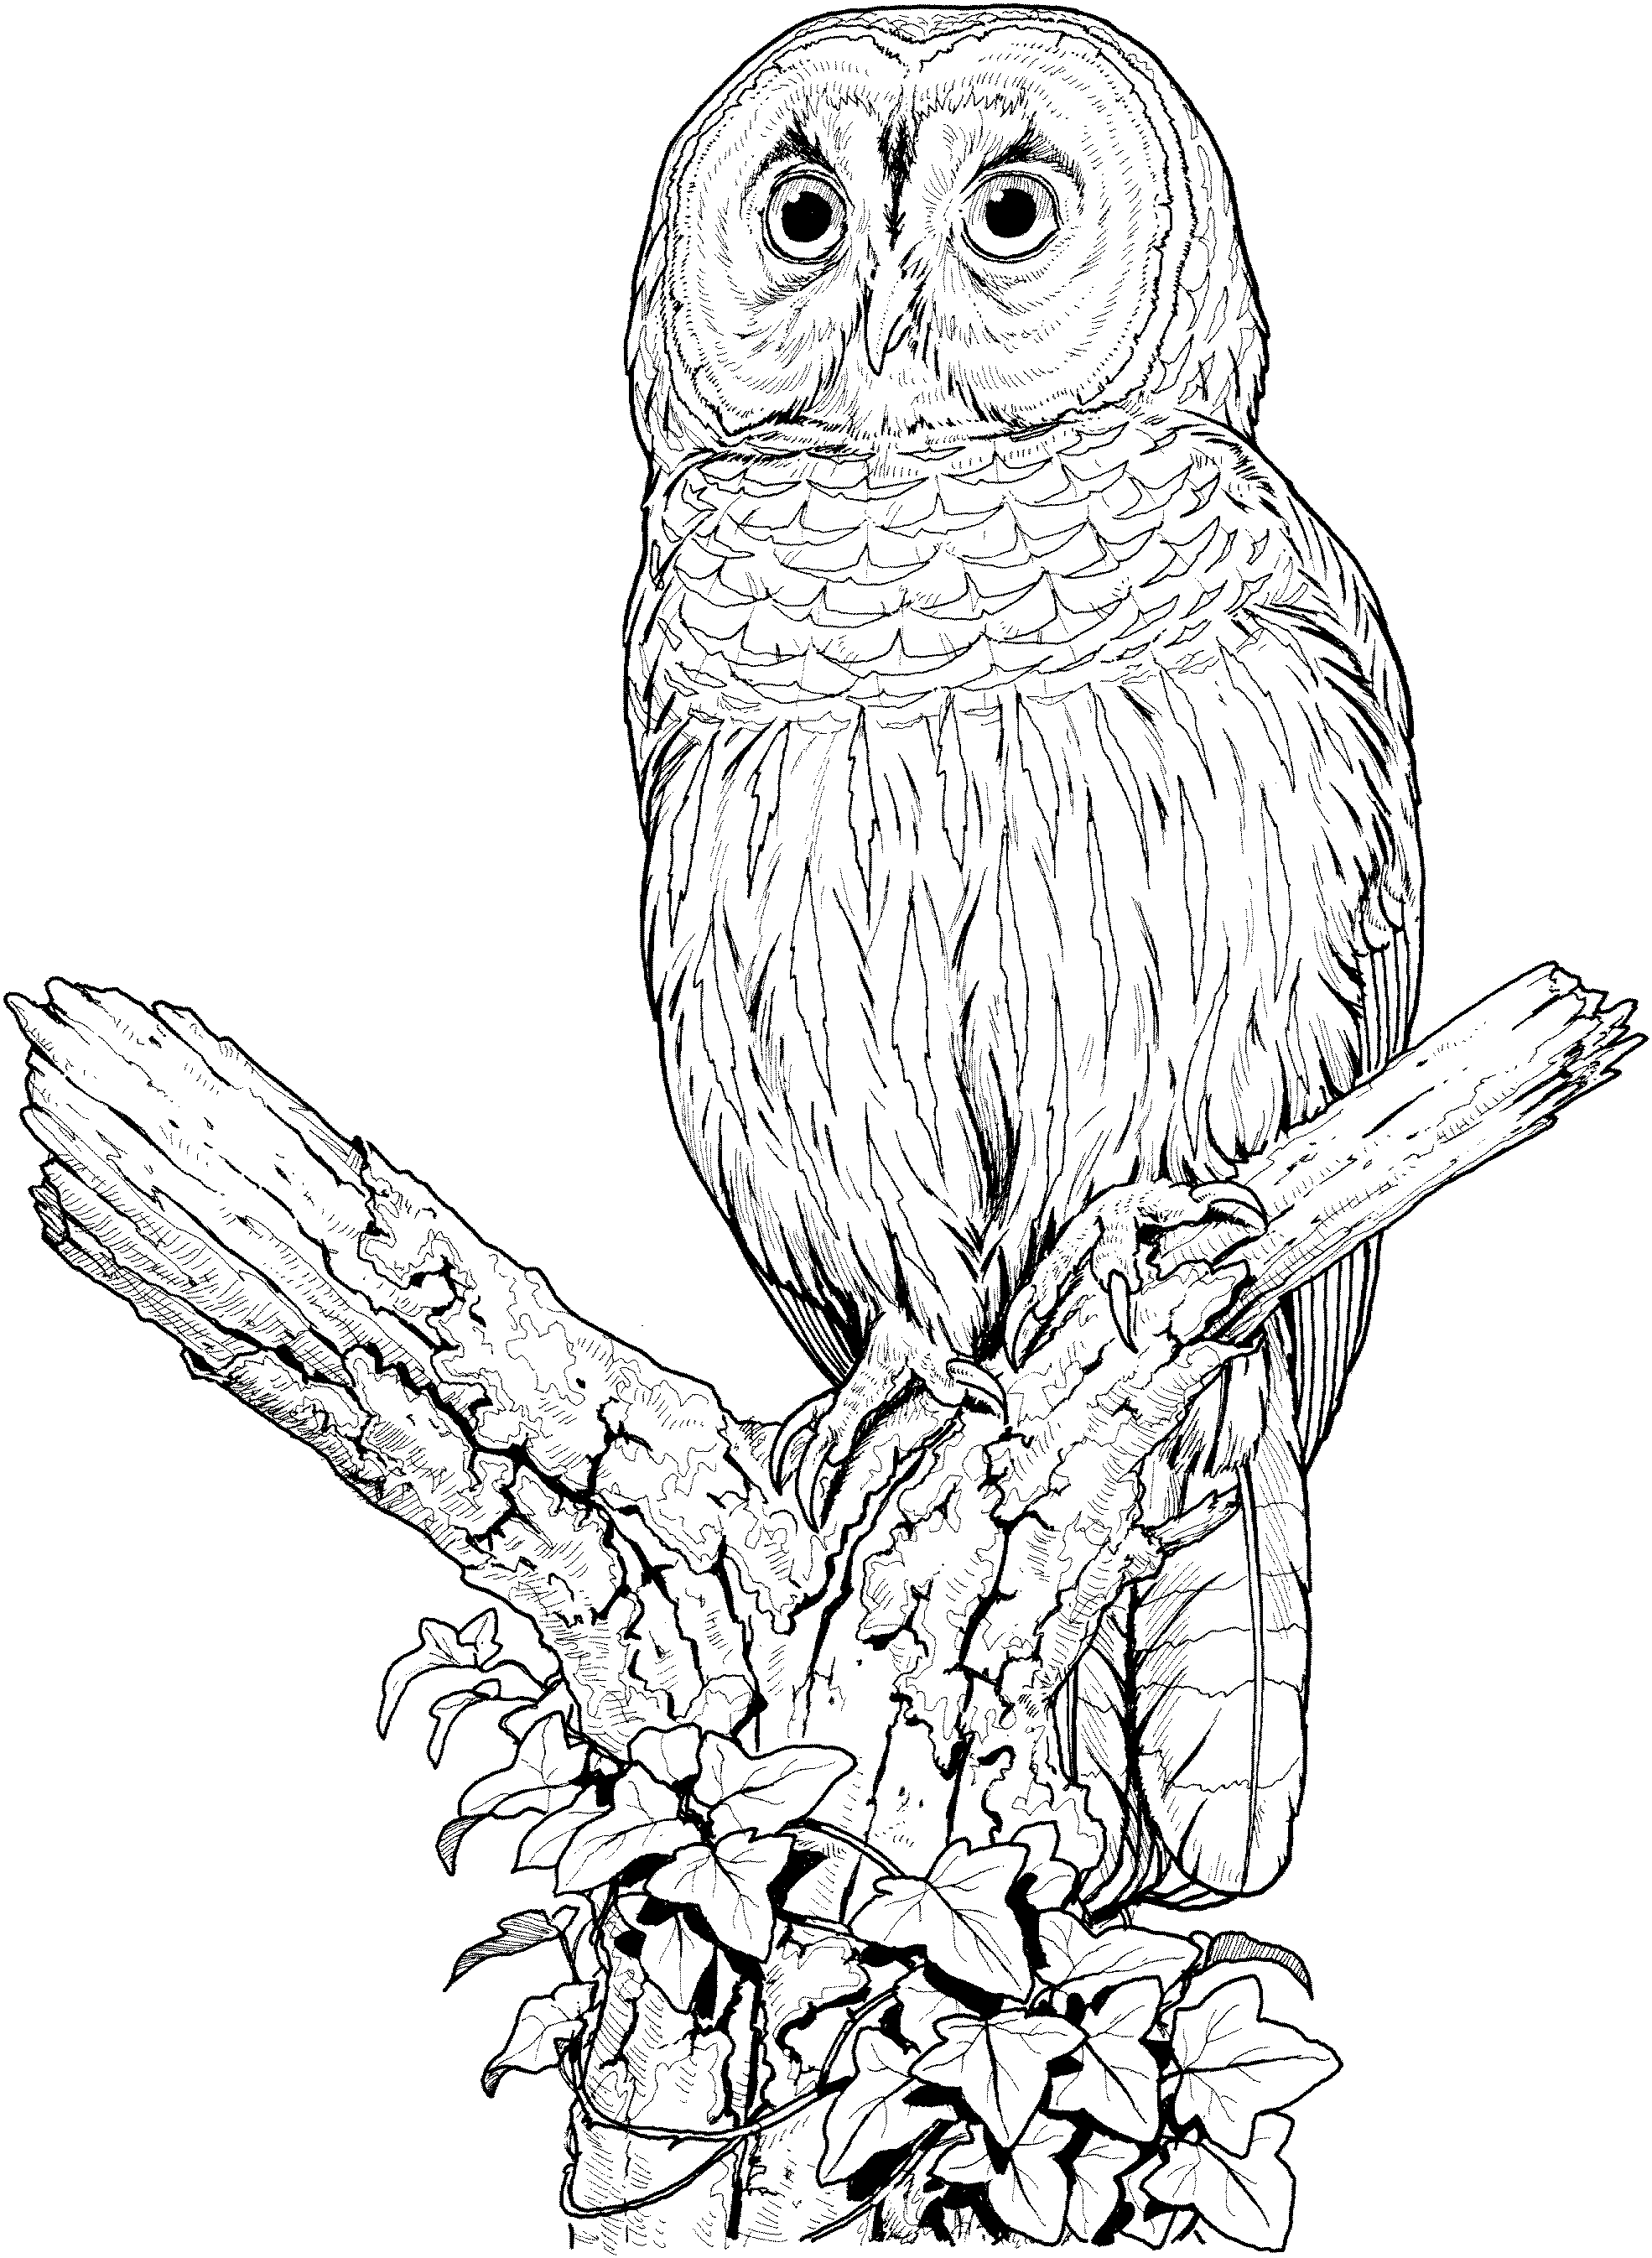 owl coloring sheet owl coloring pages all about owl coloring sheet owl 